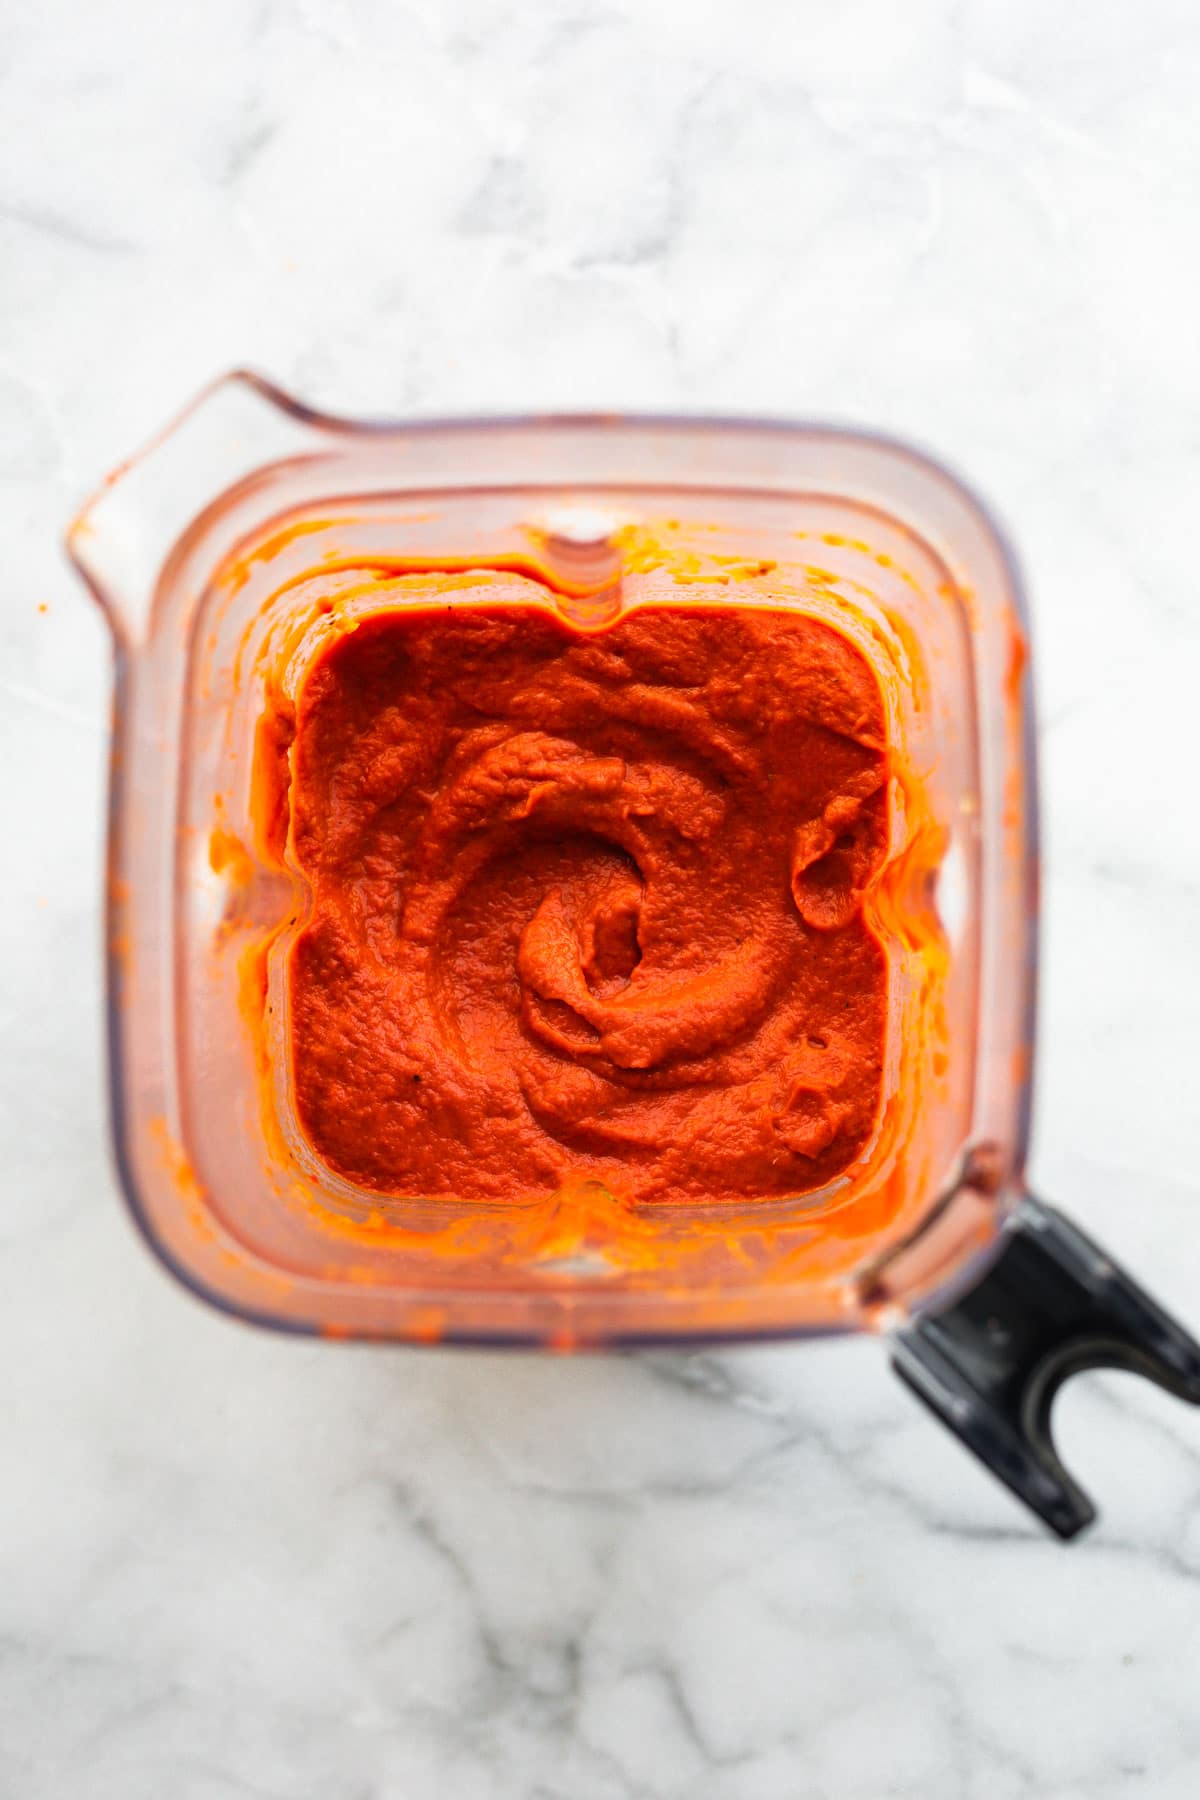 Overhead photo of a red nomato sauce in a blender.